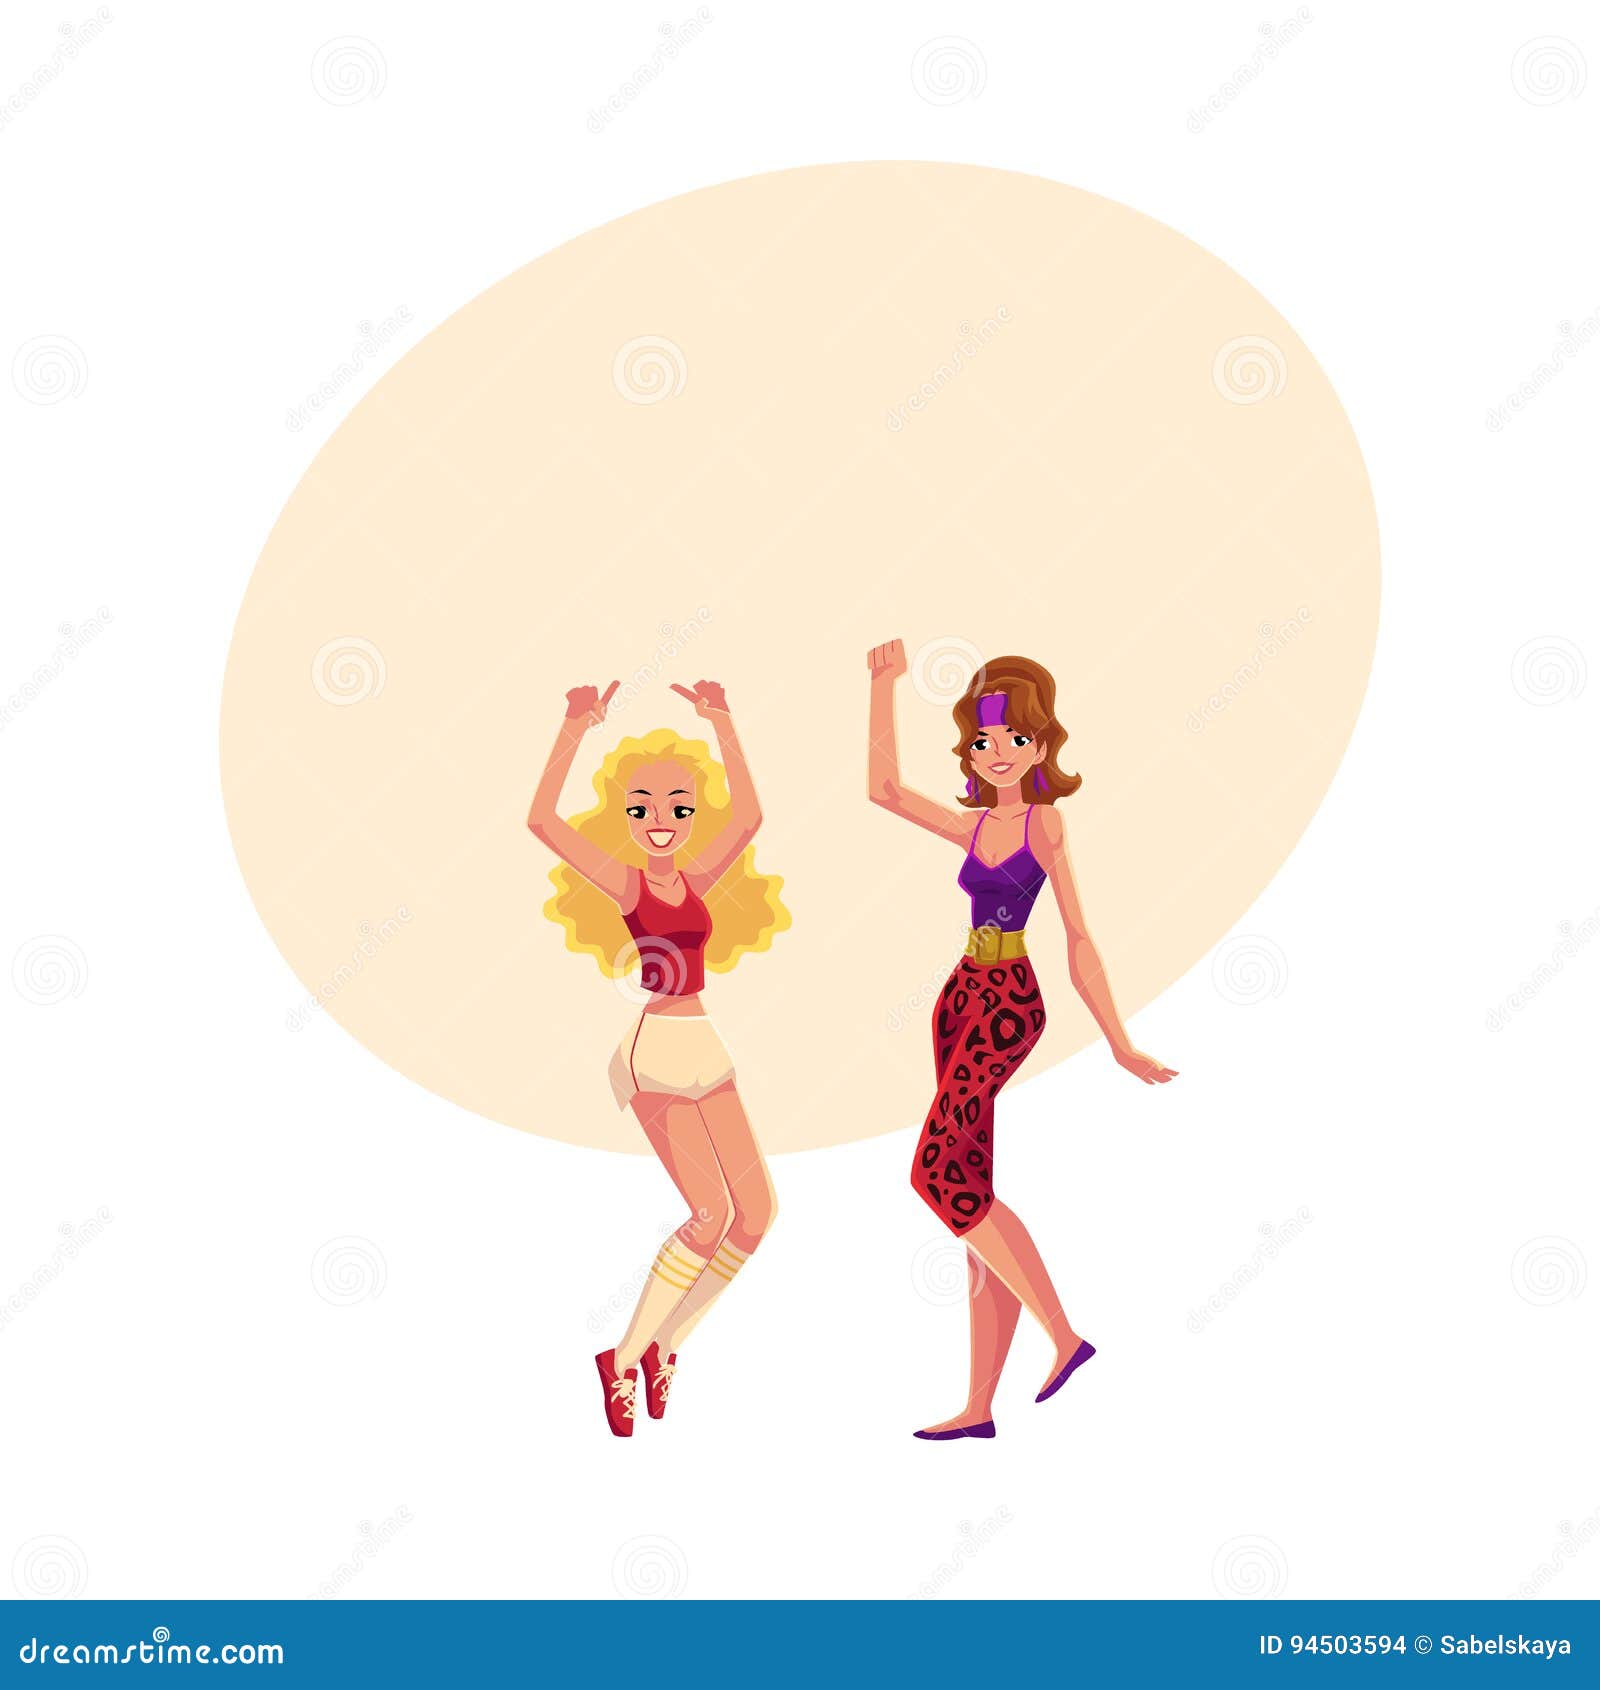 https://thumbs.dreamstime.com/z/girls-women-s-style-aerobics-outfit-sport-dance-workout-two-enjoying-cartoon-vector-illustration-space-text-retro-94503594.jpg